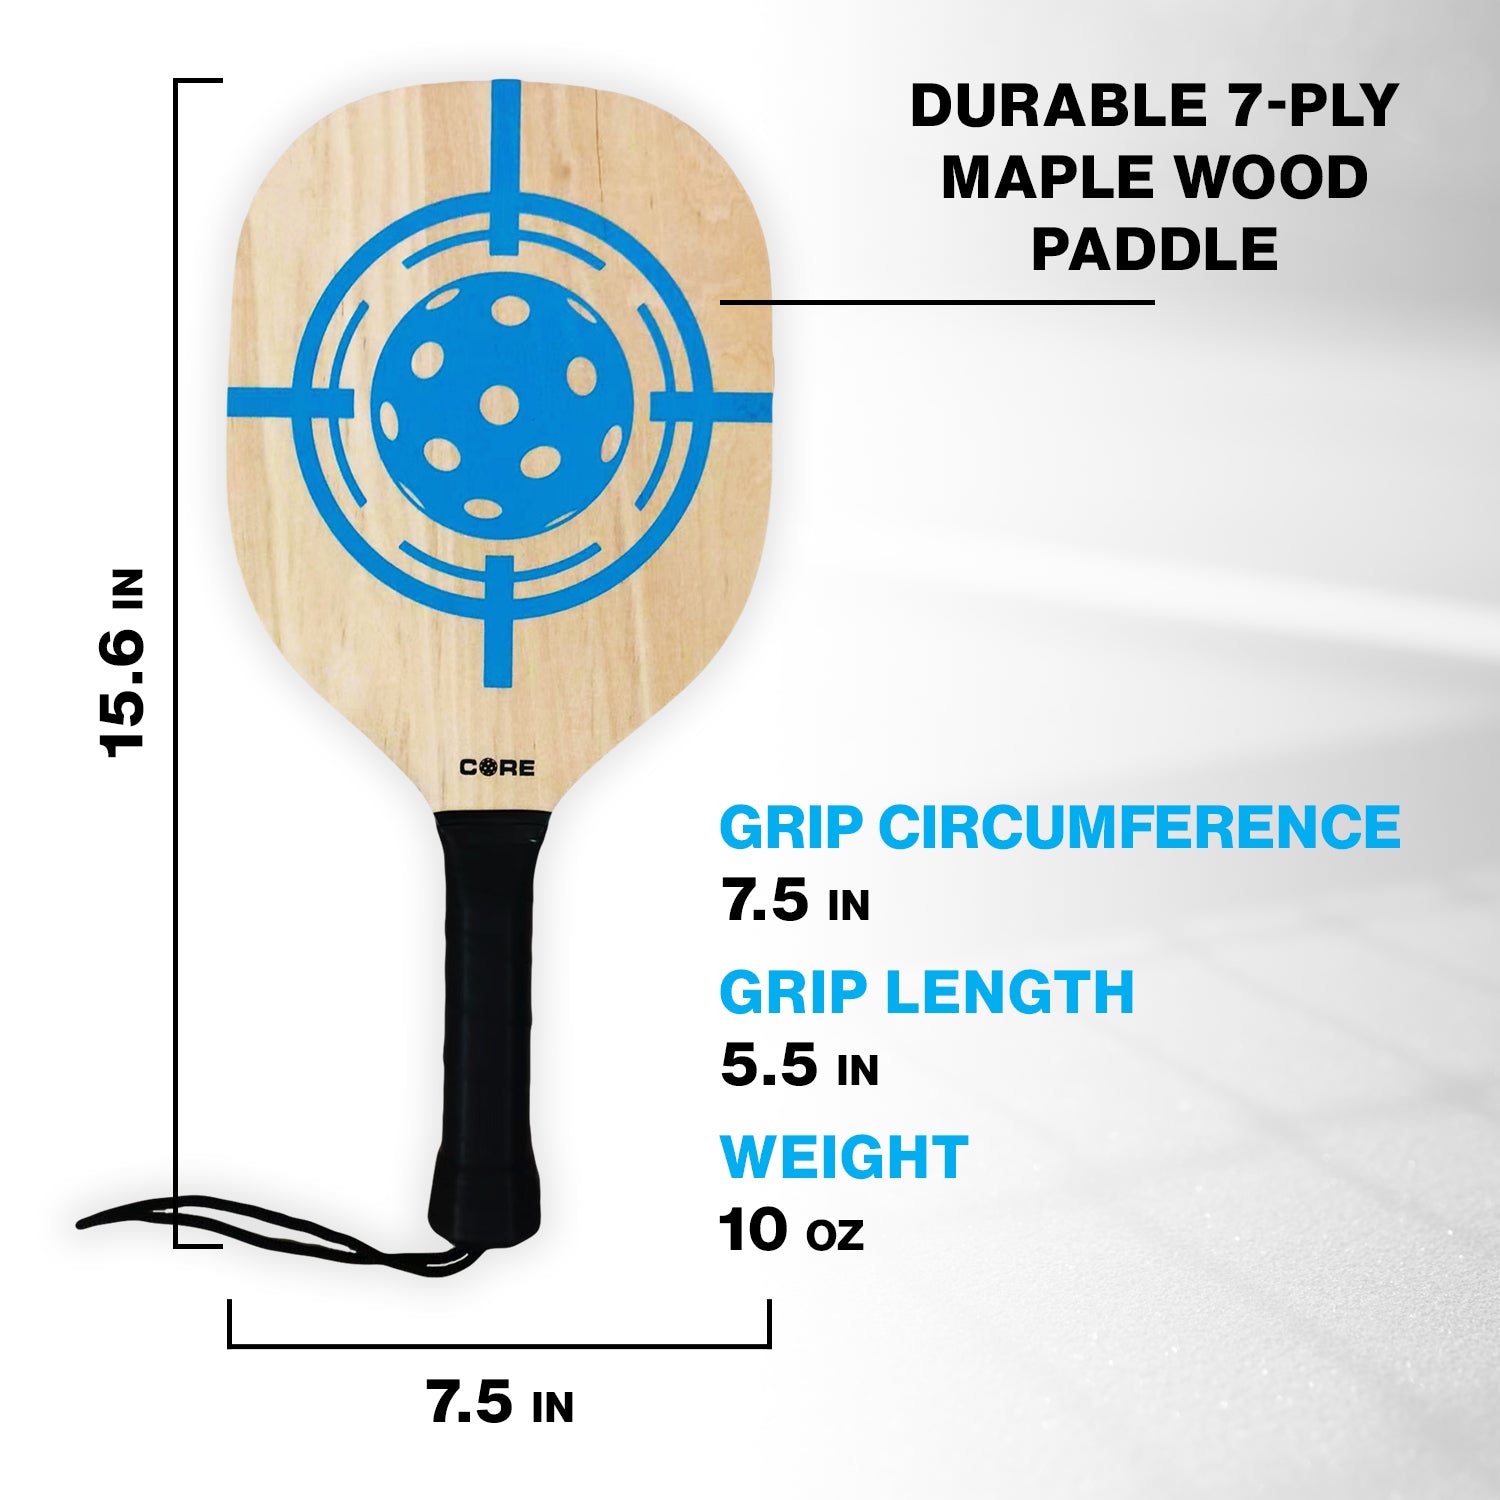 CORE PICKLEBALL PADDLE SET - 2 Wood Pickleball Paddles, 2 Outdoor Yellow Pickleballs and Mesh Carry Bag. - CORE Pickleball